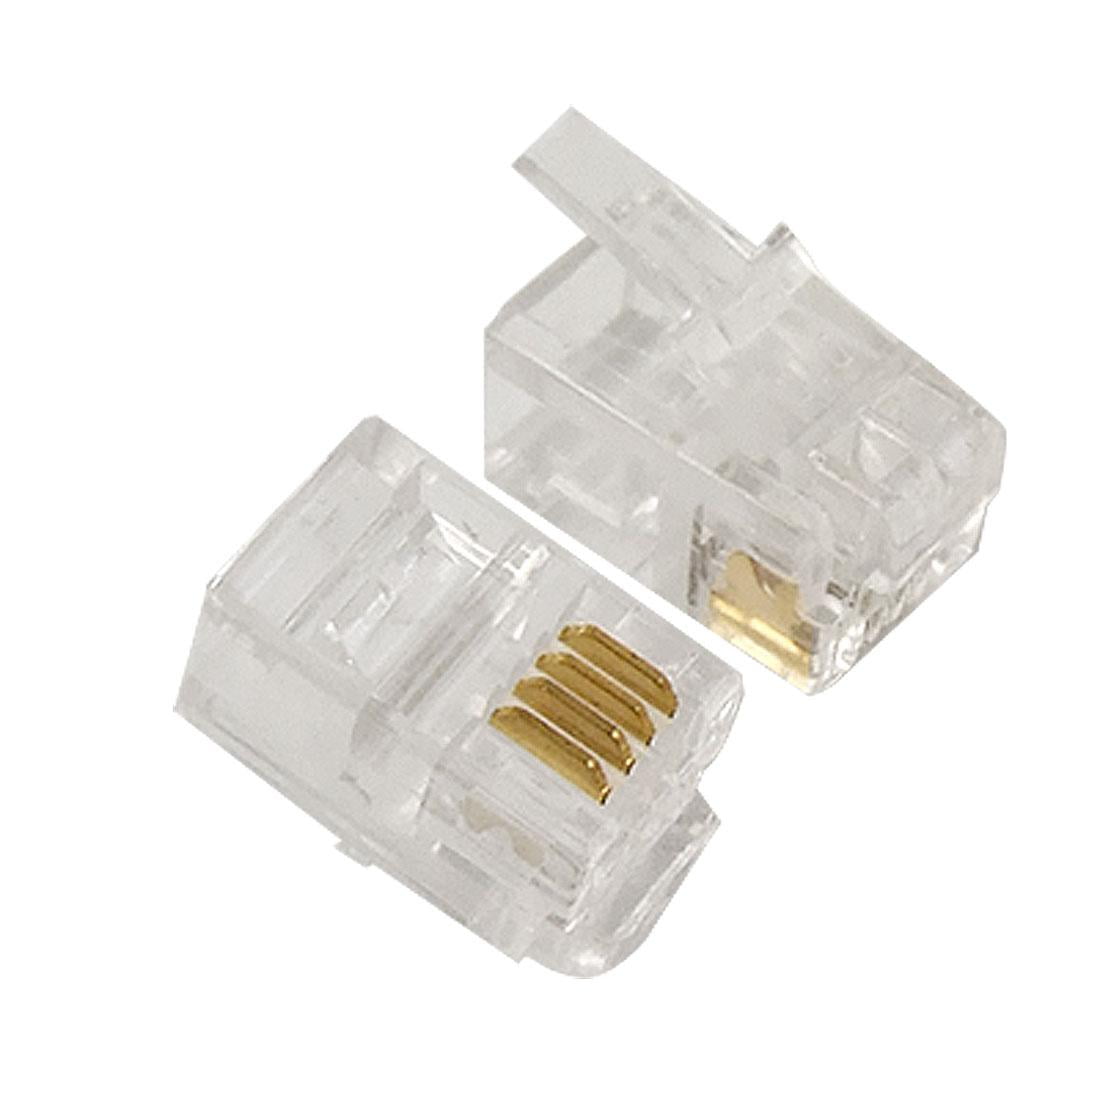 JONARD TOOLS RJ11 Pass-Through Connectors for CAT3 Round Telephone Cables  (Pack of 100) RJ11-100 - The Home Depot